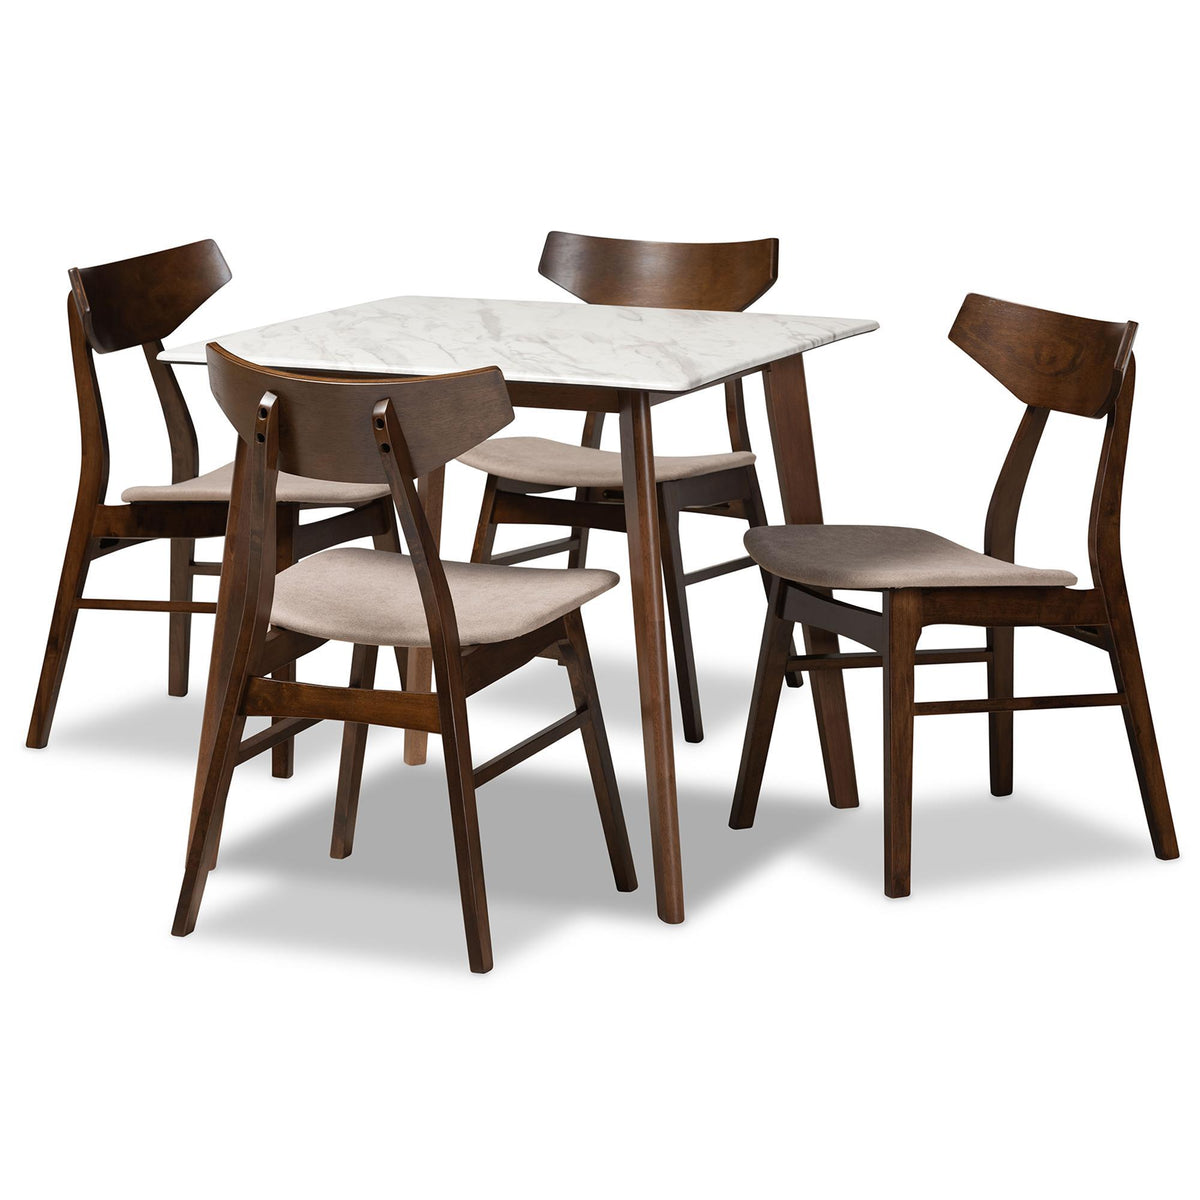 Baxton Studio Pearson Mid-Century Modern Transitional Light Beige Fabric Upholstered And Walnut Brown Finished Wood 5-Piece Dining Set With Faux Marble Table - Pearson-Latte/Walnut-5PC Dining Set